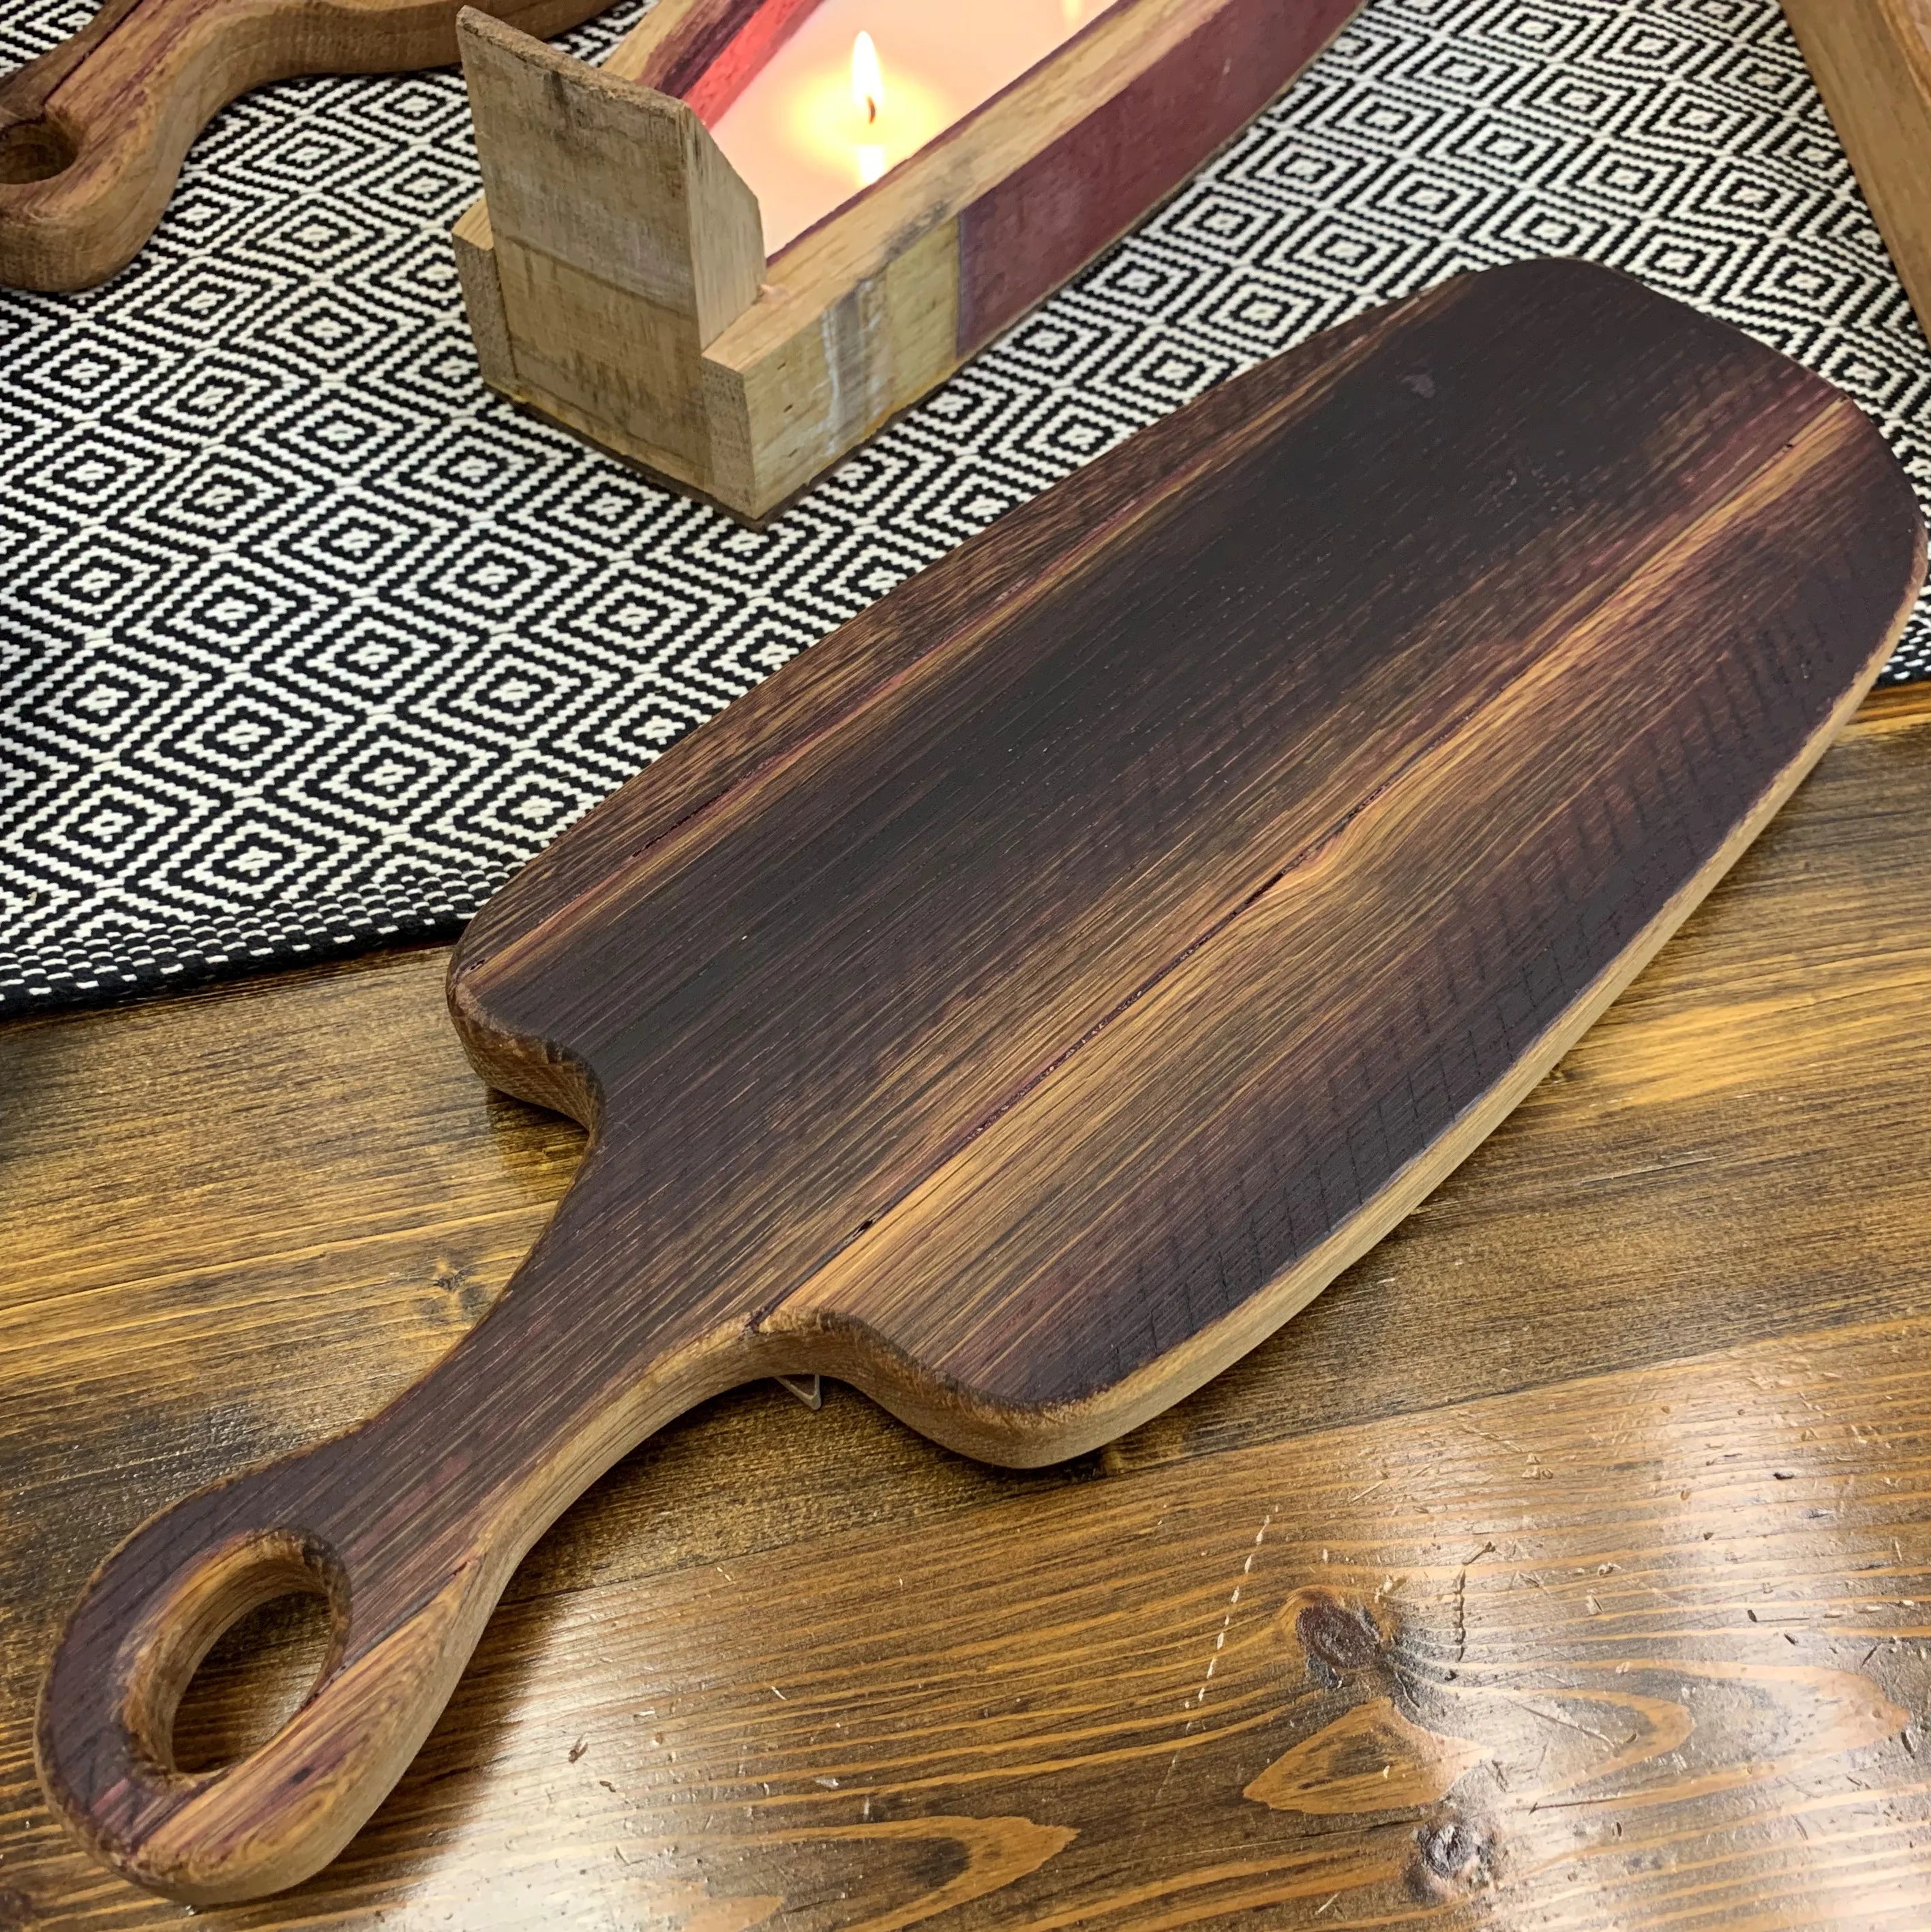 Personalized Wood Charcuterie Board - Made from a reclaimed white